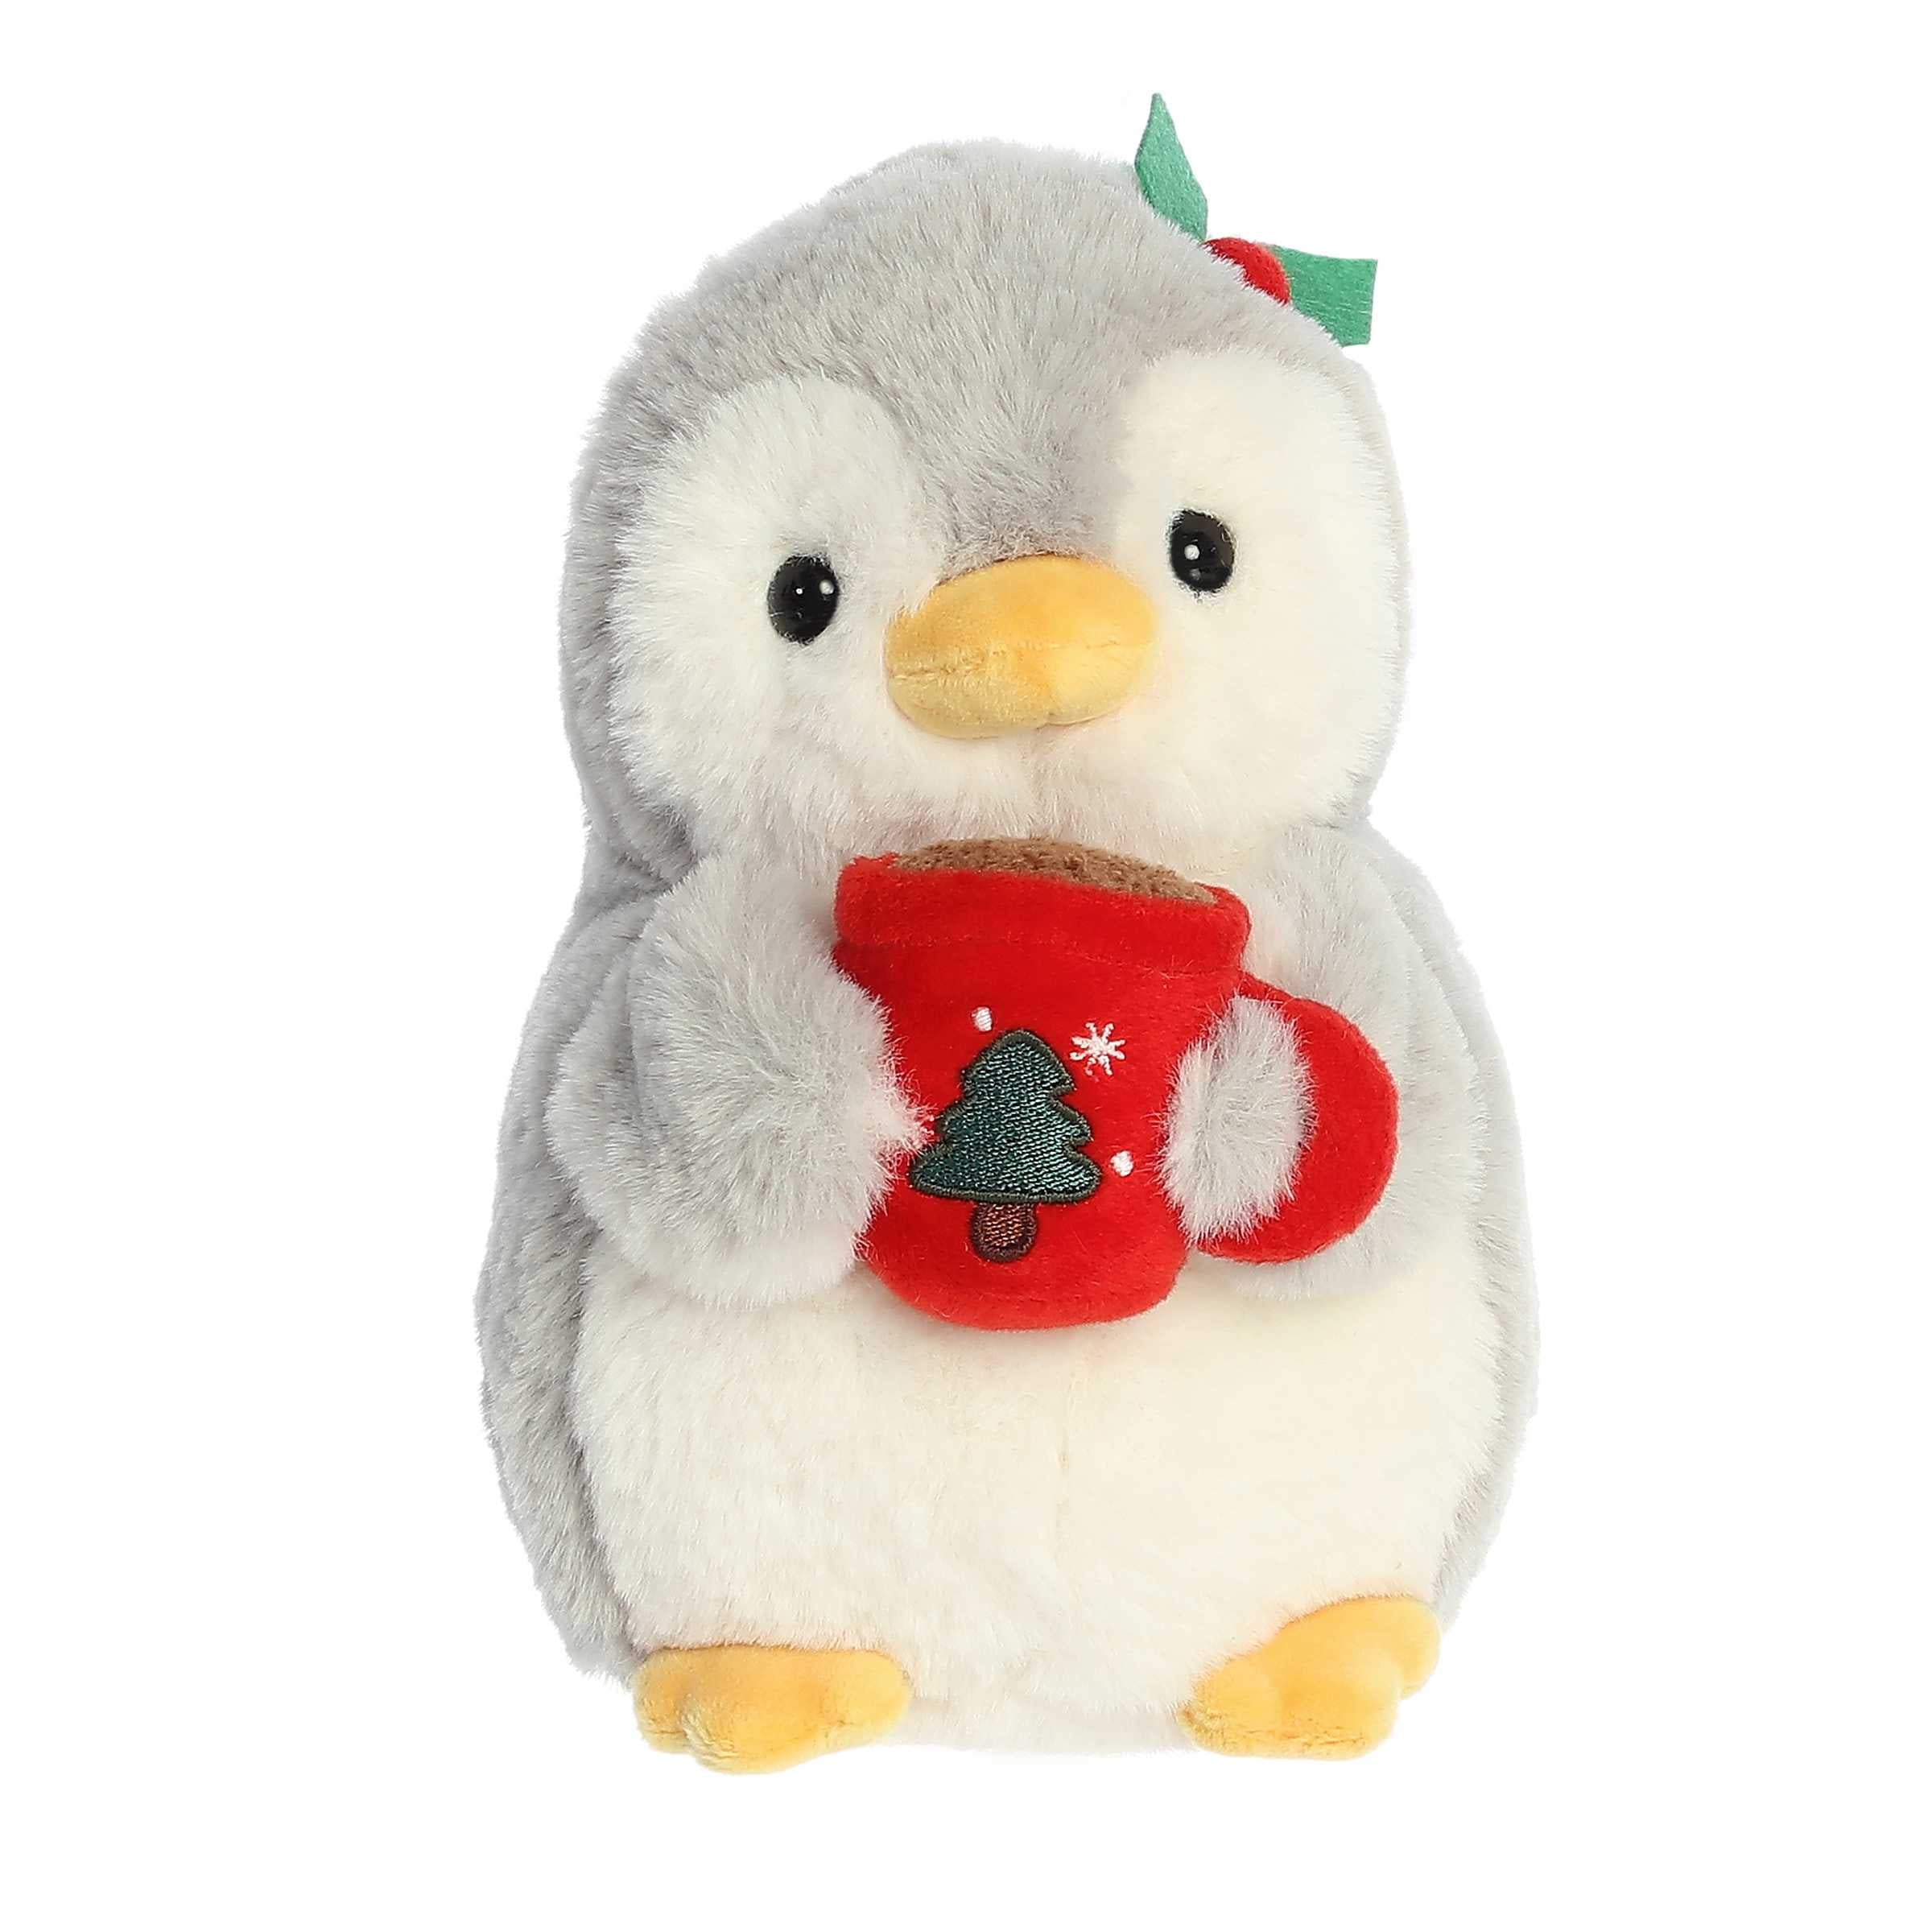 Light grey penguin with a yellow beak and feet wearing holly on it head holding a red mug with a Christmas tree in front